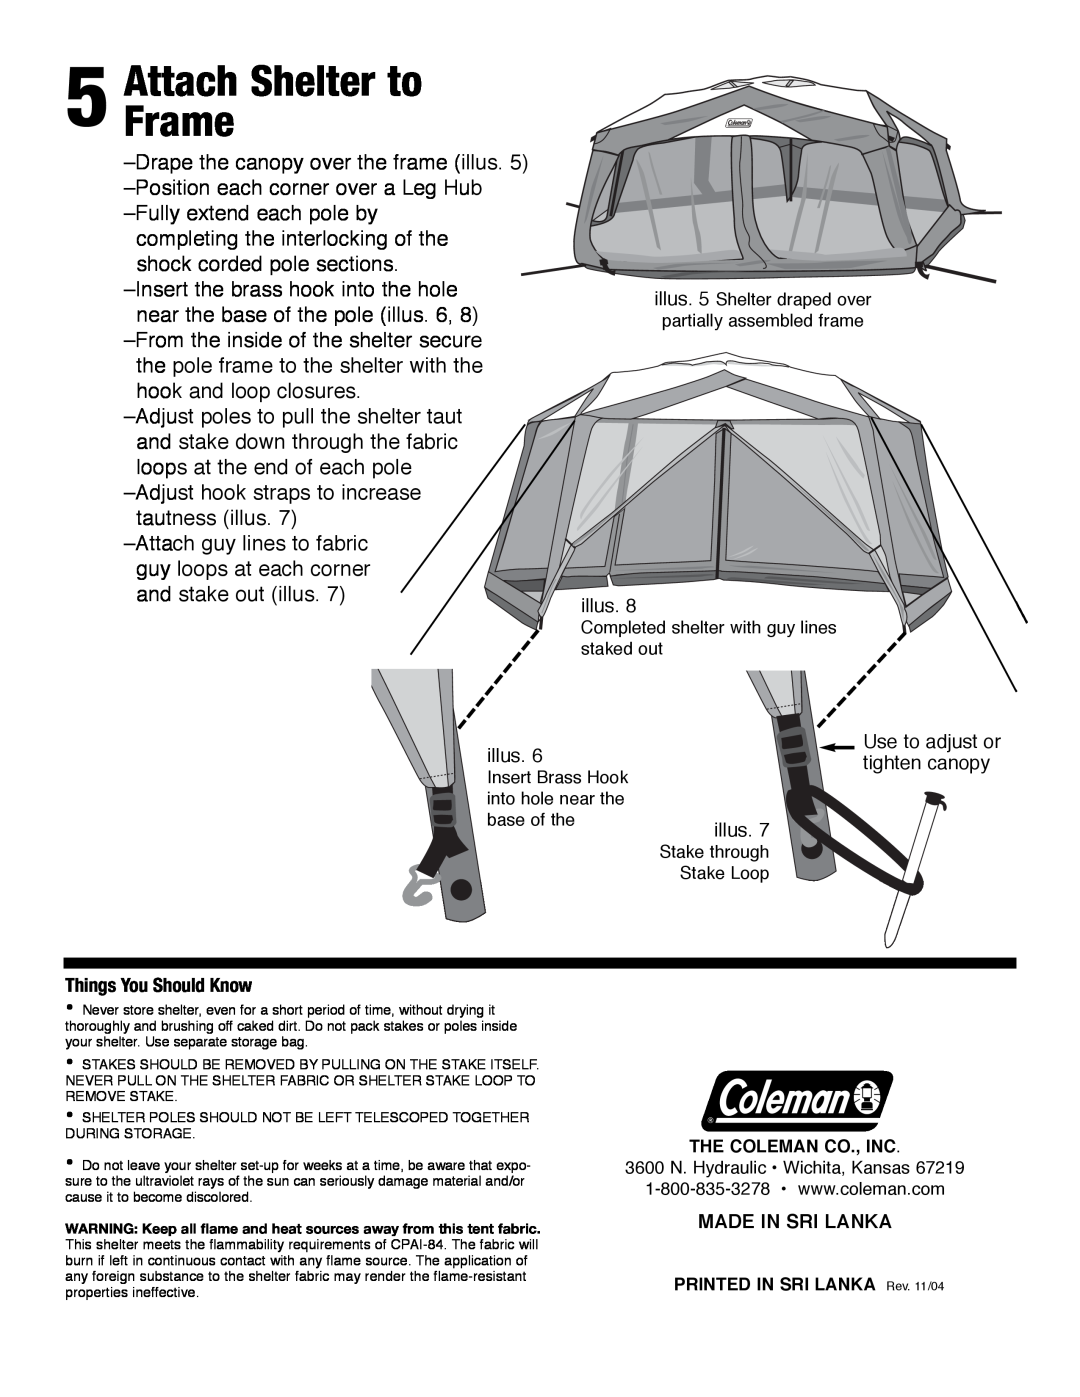 Coleman 9392-515, 9392-2311, 9392-2301, 9392-2261, 9392-2271, 9392-2321, 9392-2251 manual AttachFrame Shelter to 